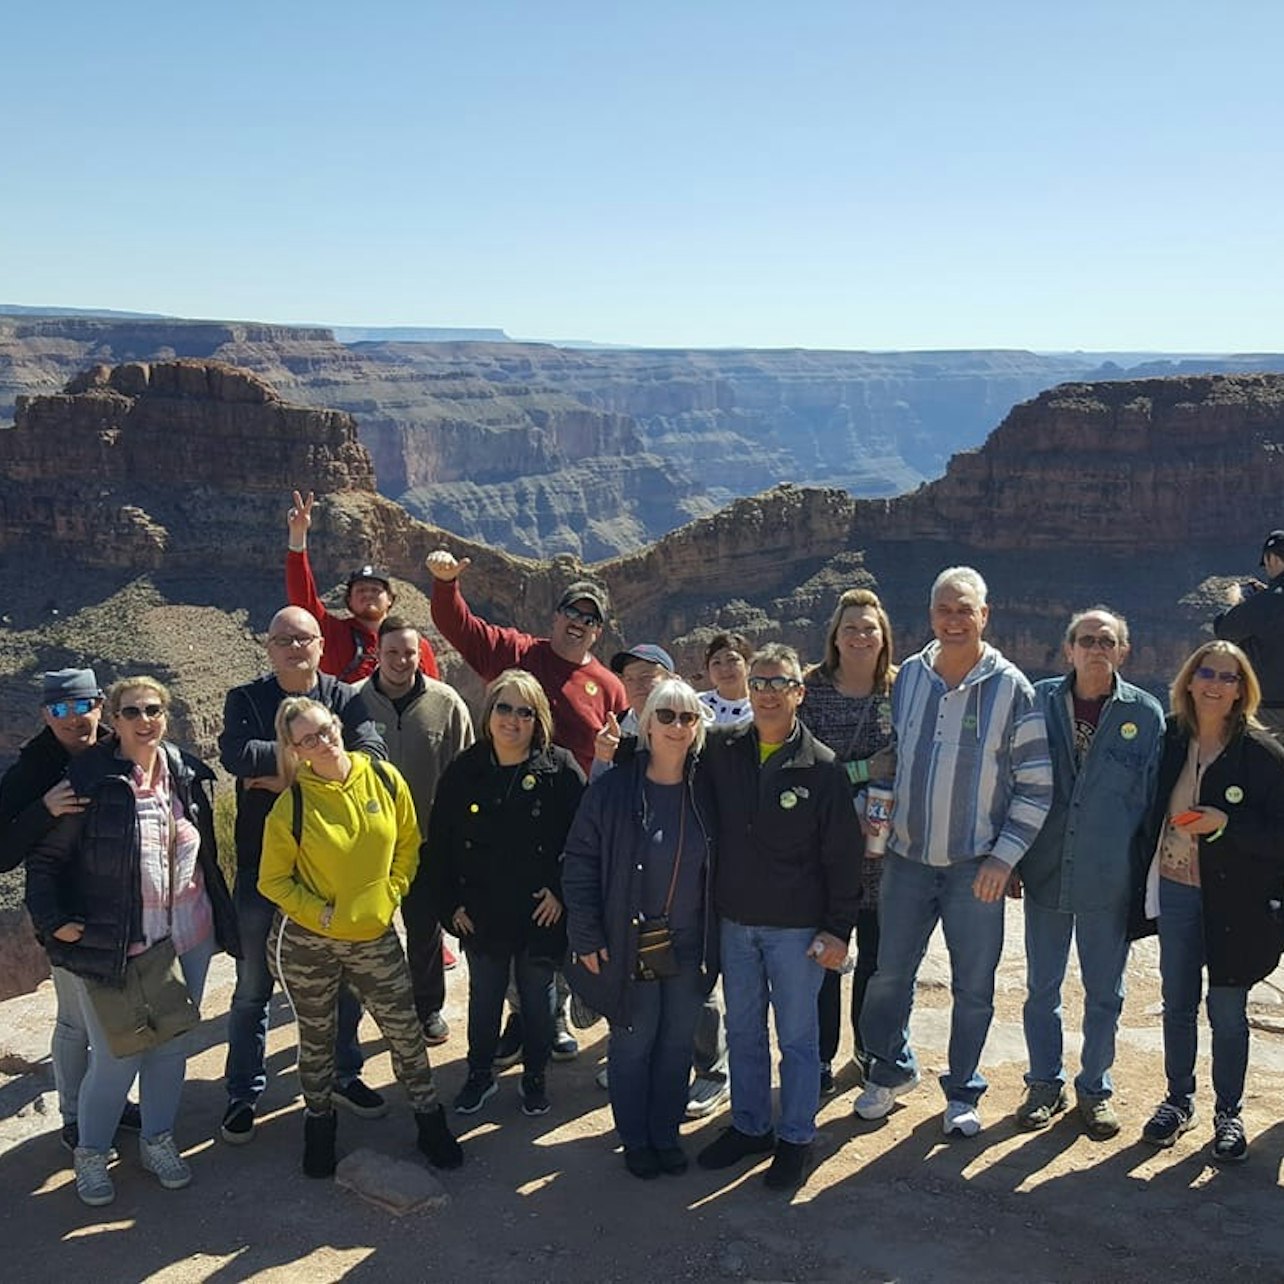 VIP Grand Canyon West Rim Bus Tour + Hoover Dam Photo Stop + Optional Skywalk - Accommodations in Las Vegas